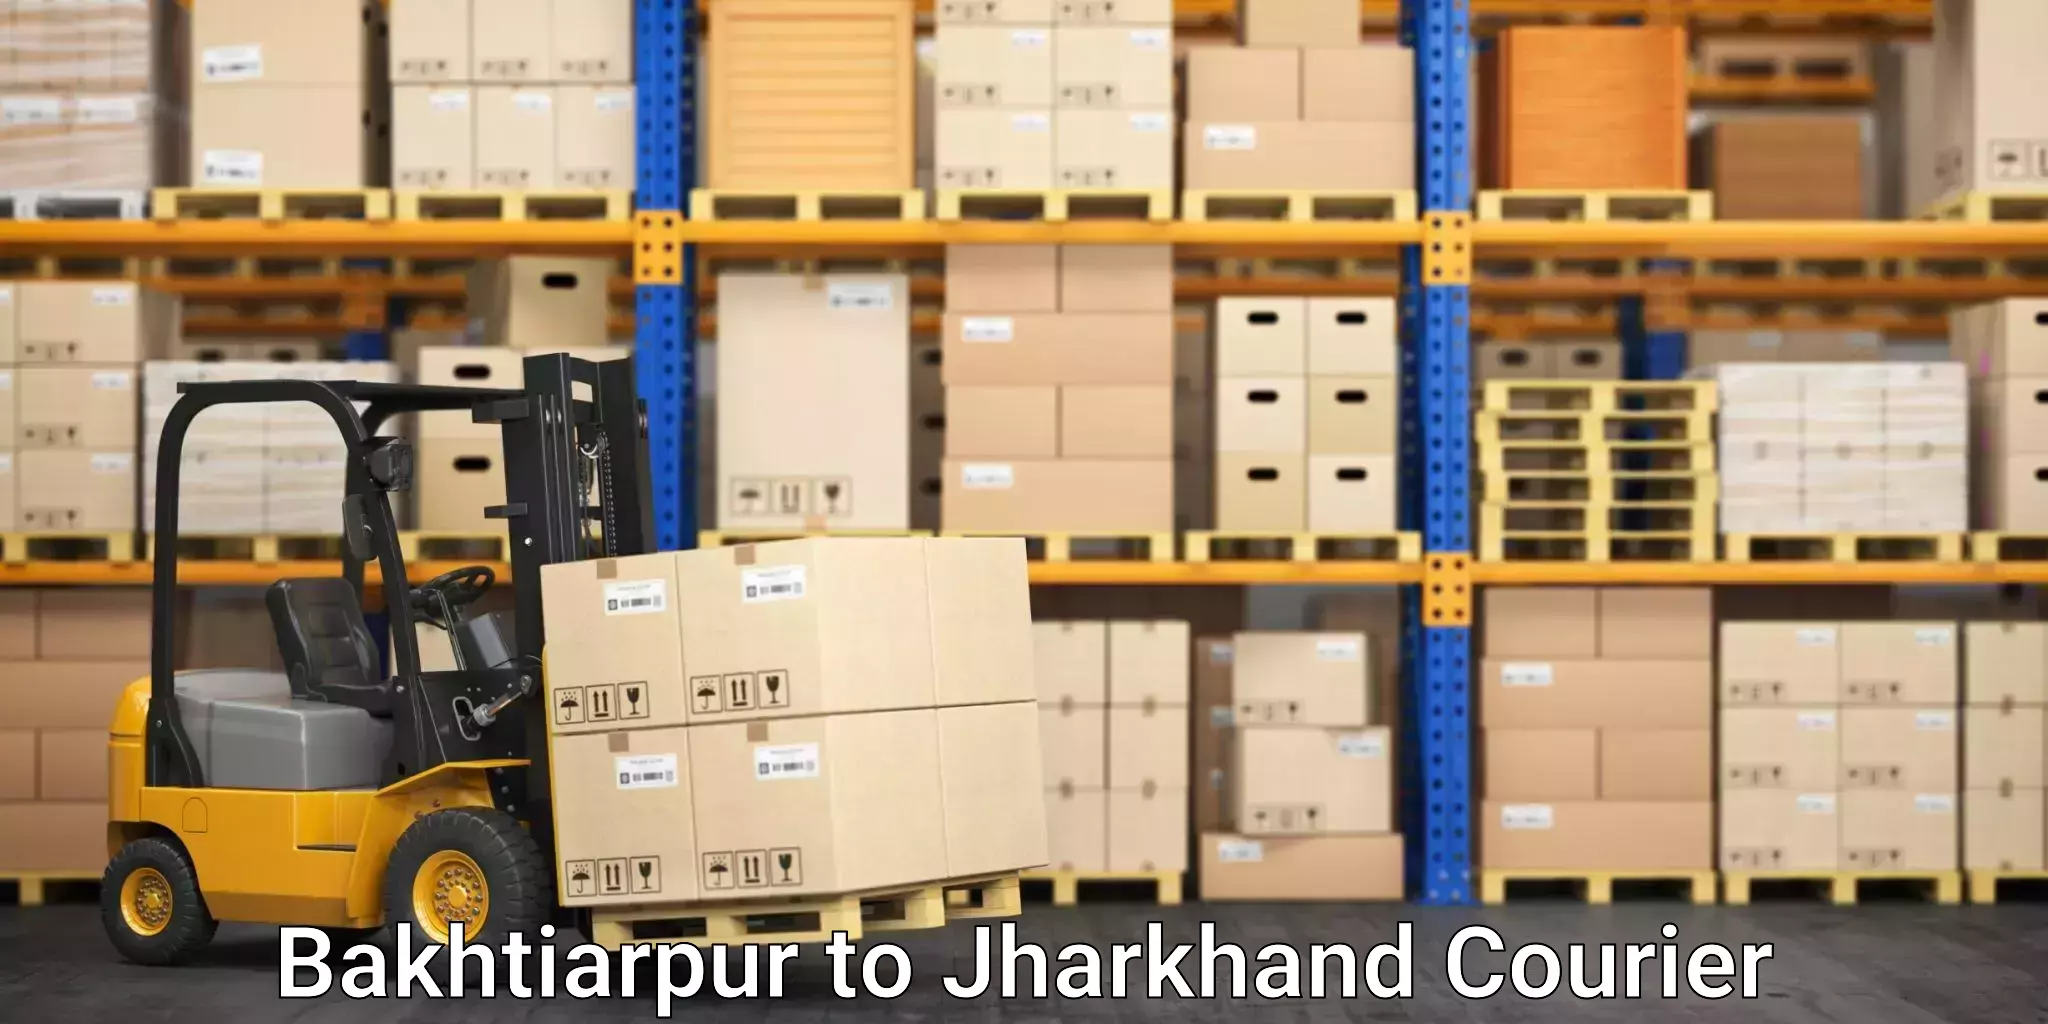 Moving and storage services Bakhtiarpur to Ramgarh